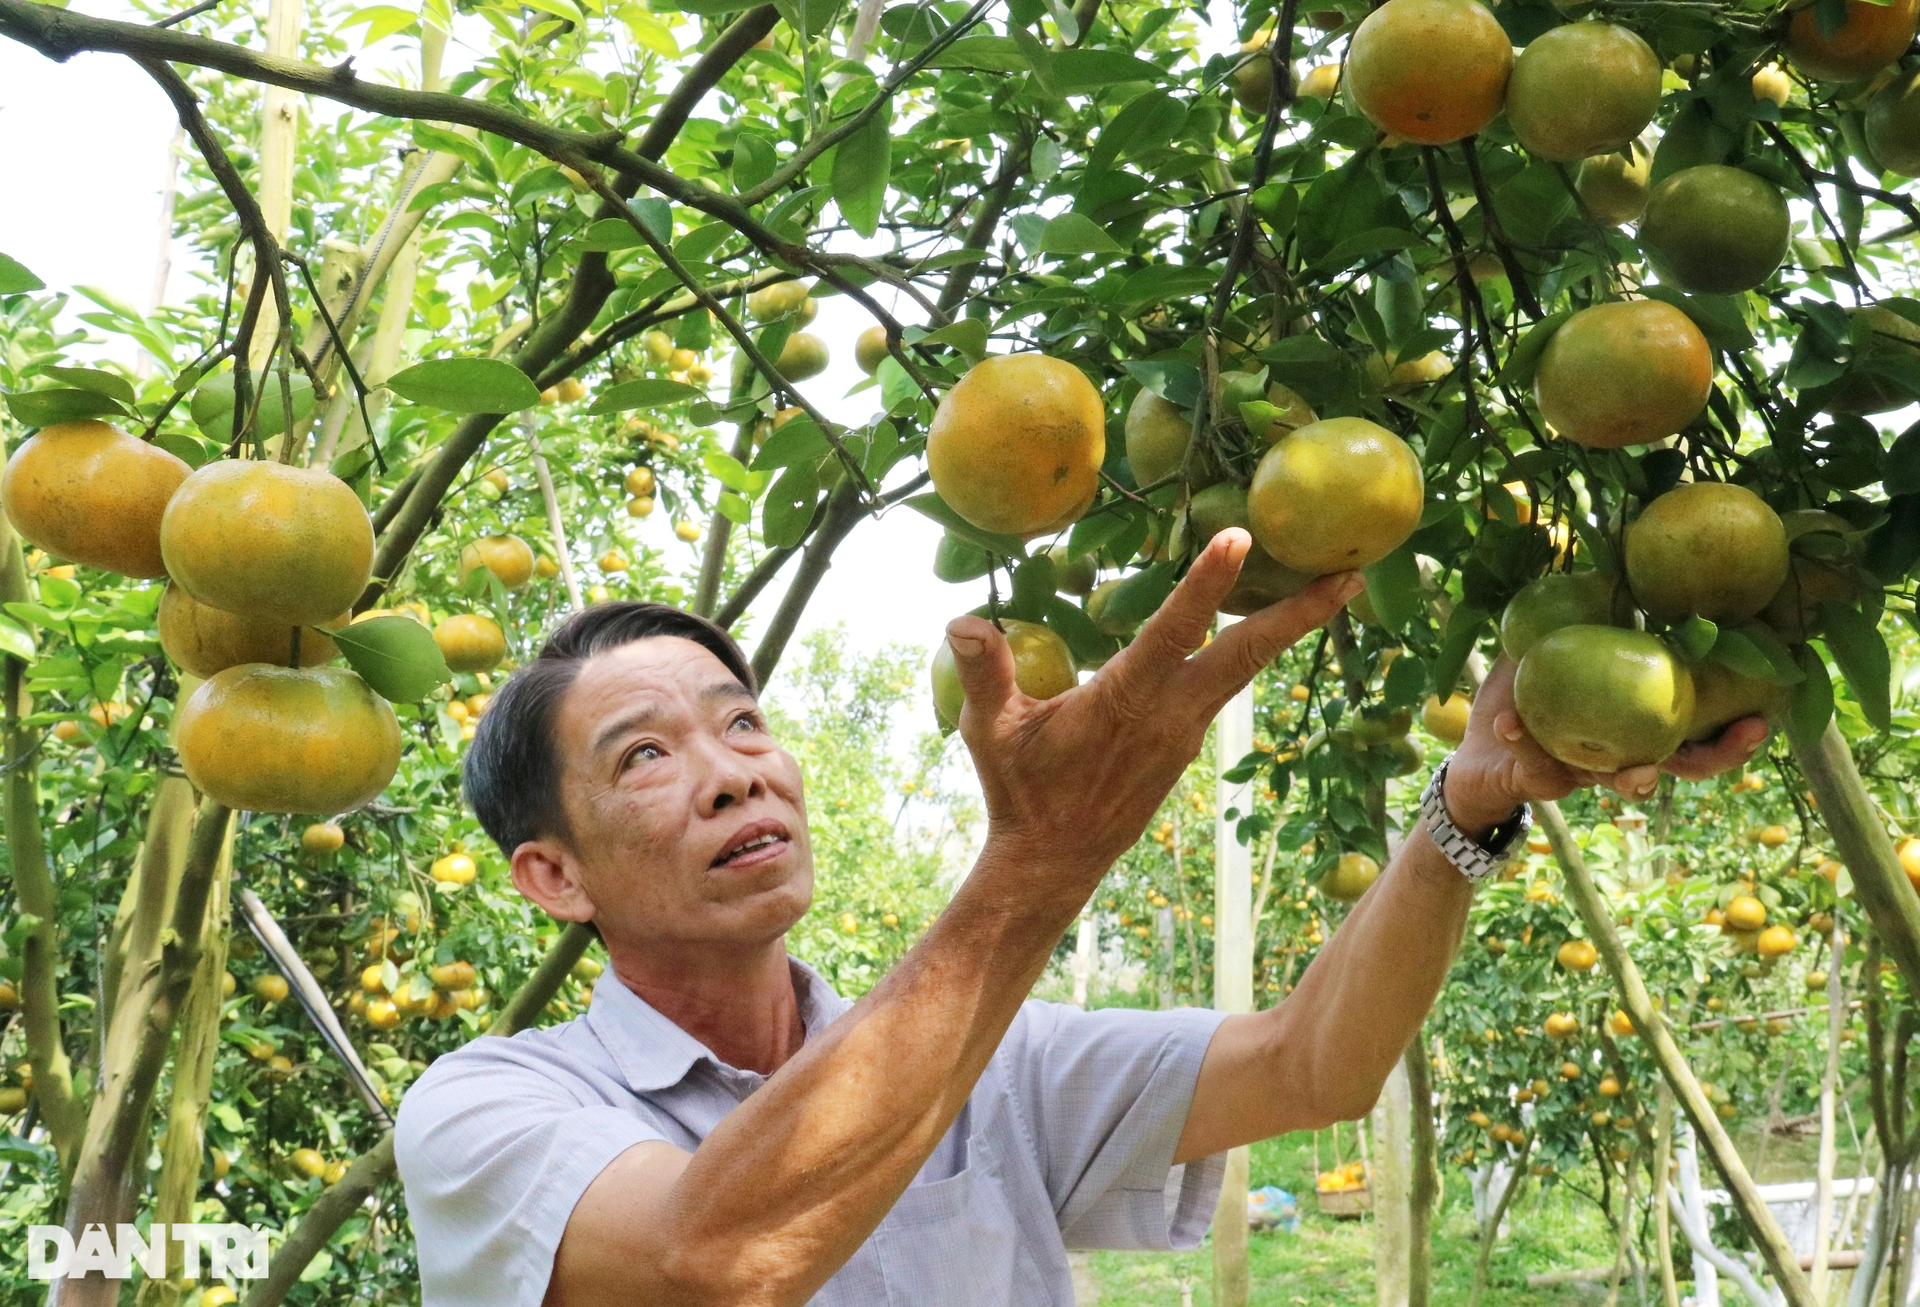 dong thap province, lai vung district, tangerine, “breaking into” tangerine orchards earns 50 times more than growing rice